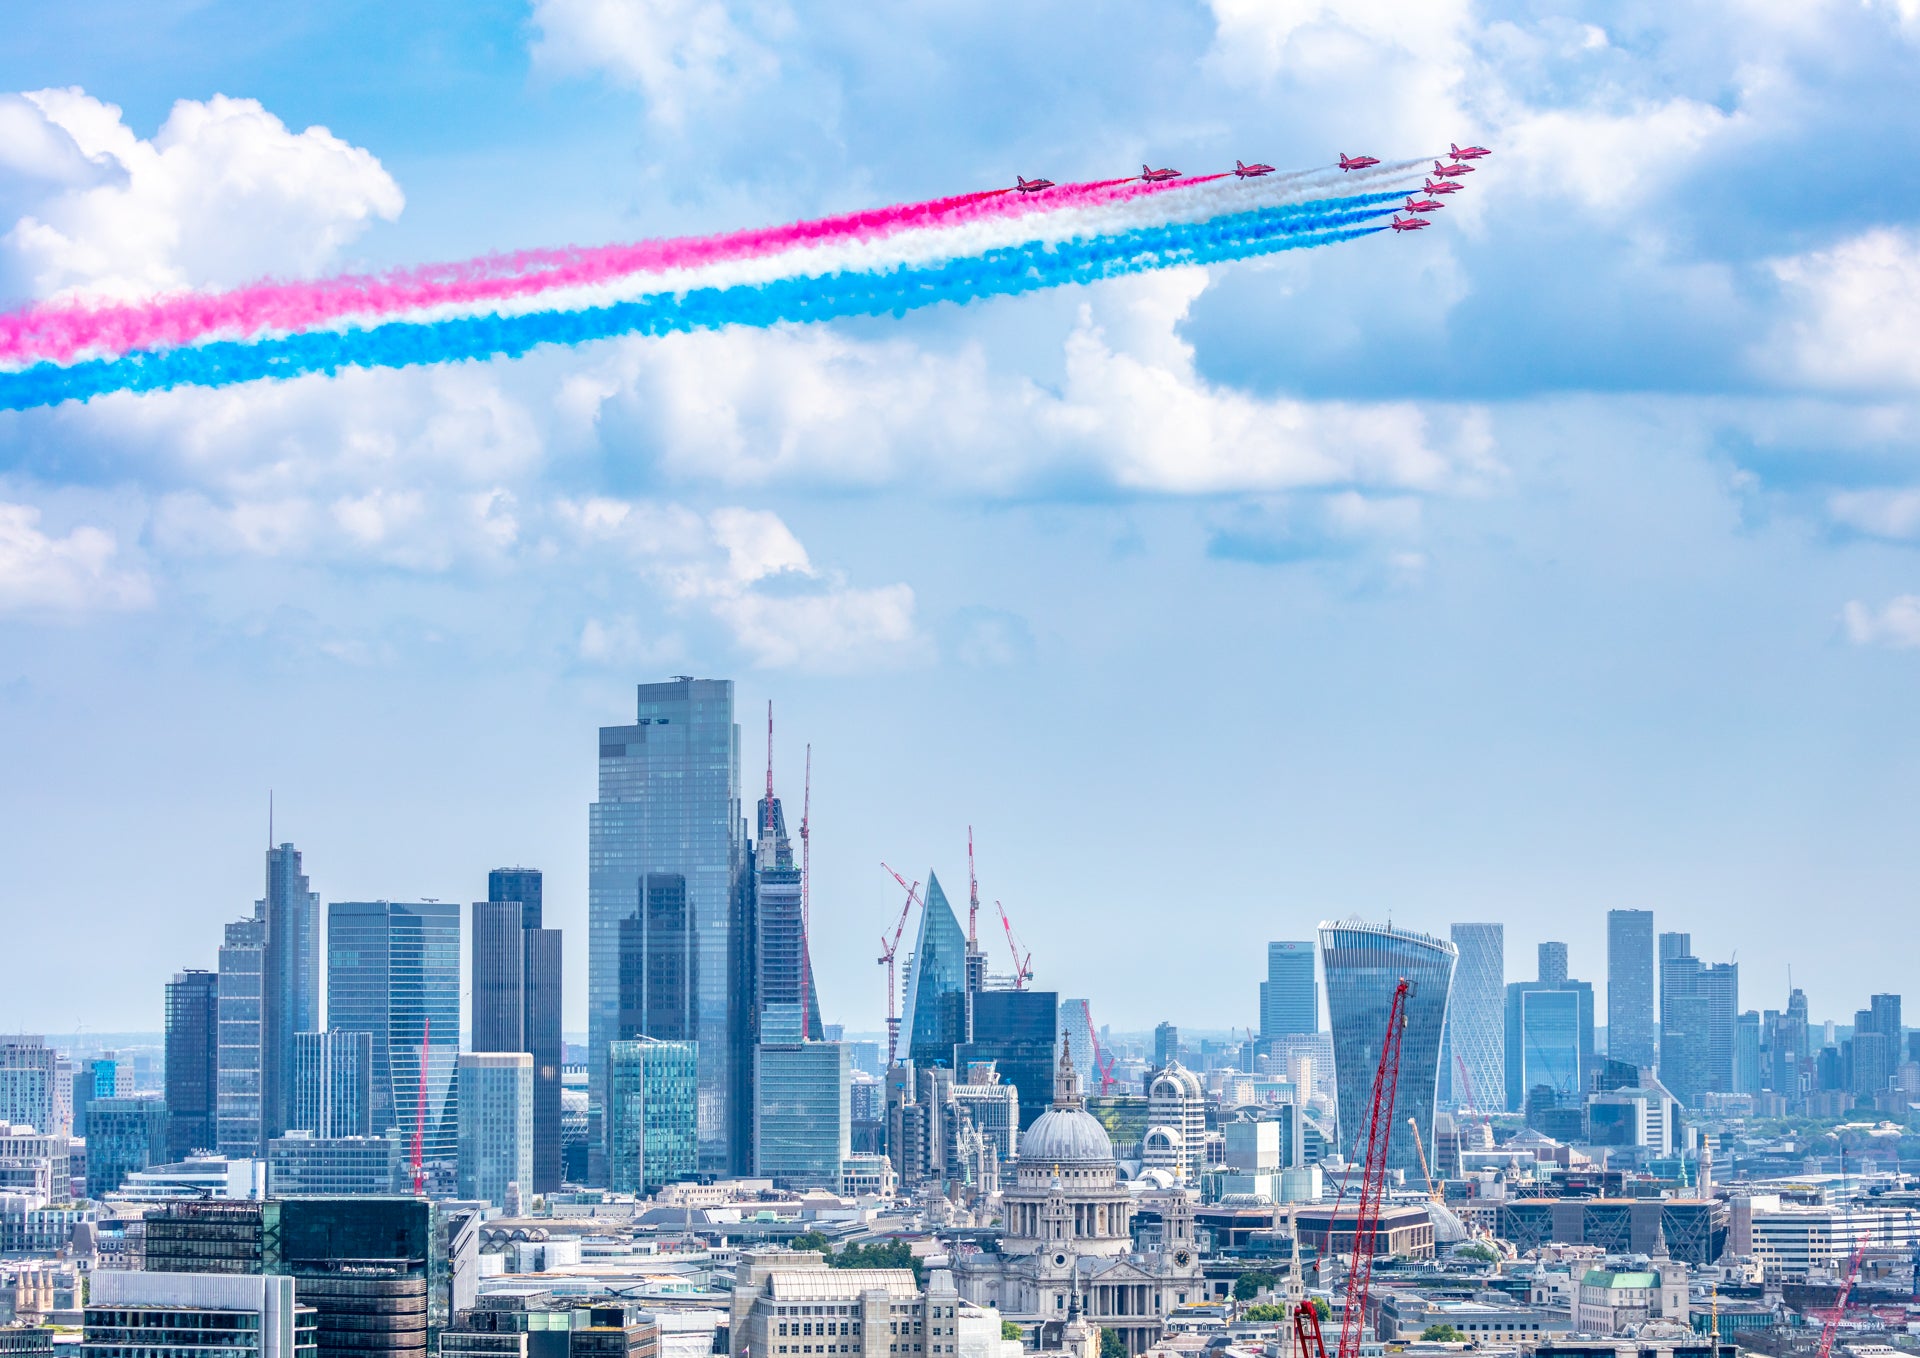 The Queen's Jubilee: The Red Arrows flyover.